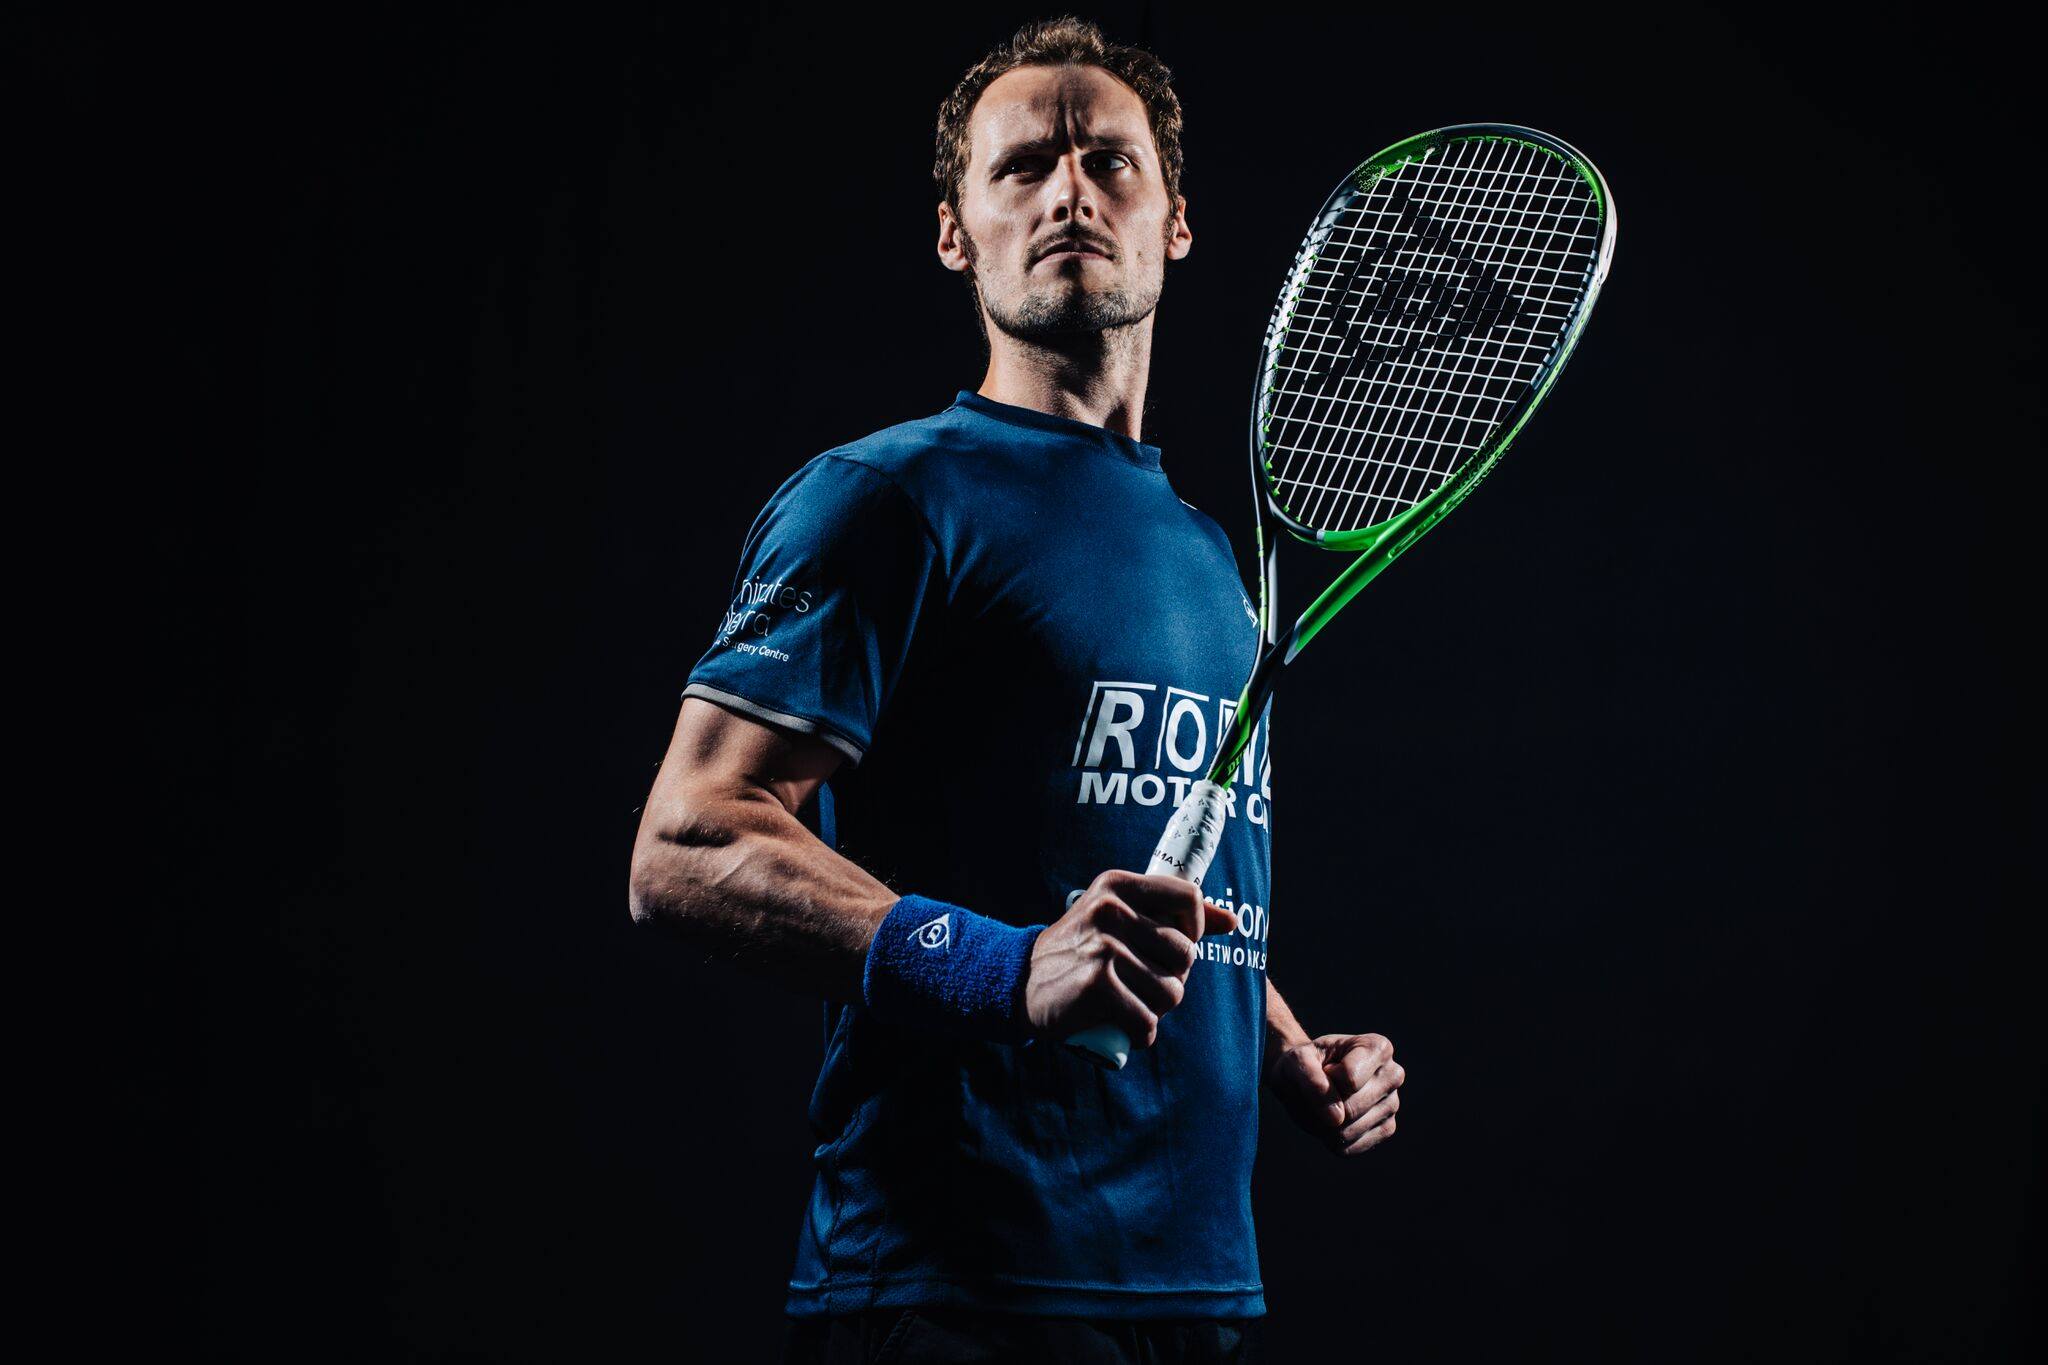 Grégory Gaultier: “It would be frustrating to see the padel at the Olympics ”